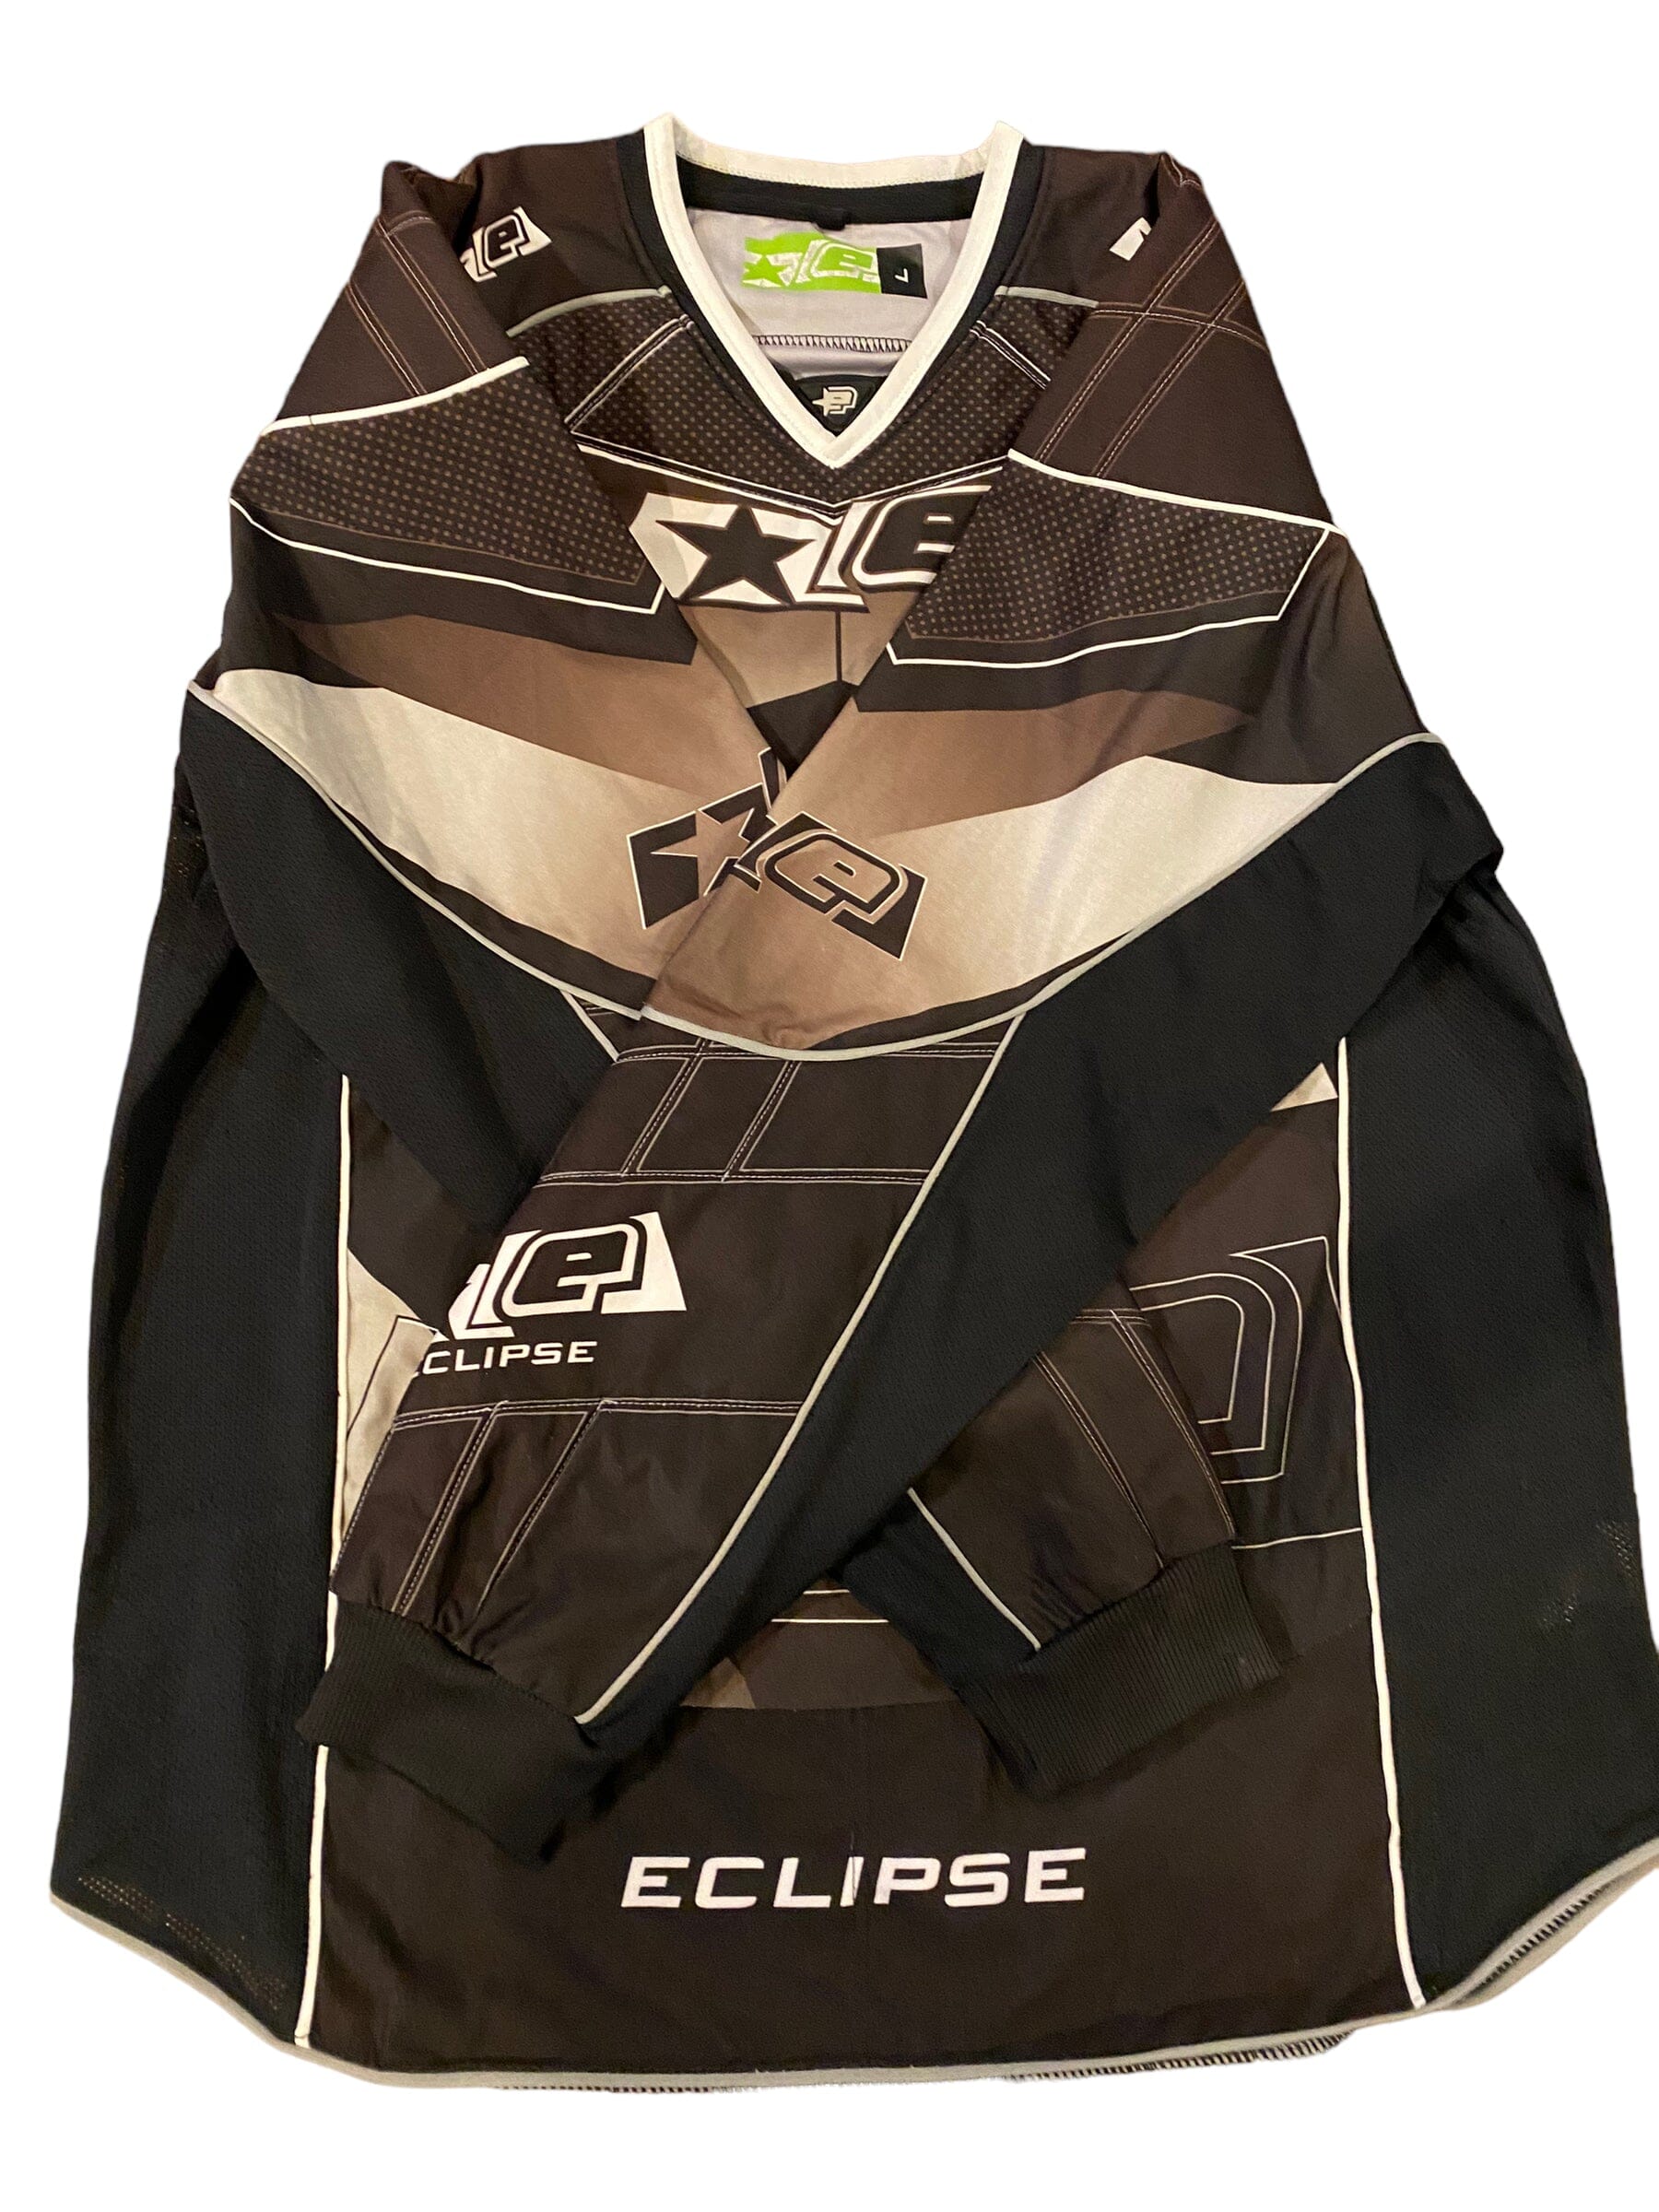 Used Planet Eclipse Paintball Jersey size Large Paintball Gun from CPXBrosPaintball Buy/Sell/Trade Paintball Markers, Paintball Hoppers, Paintball Masks, and Hormesis Headbands